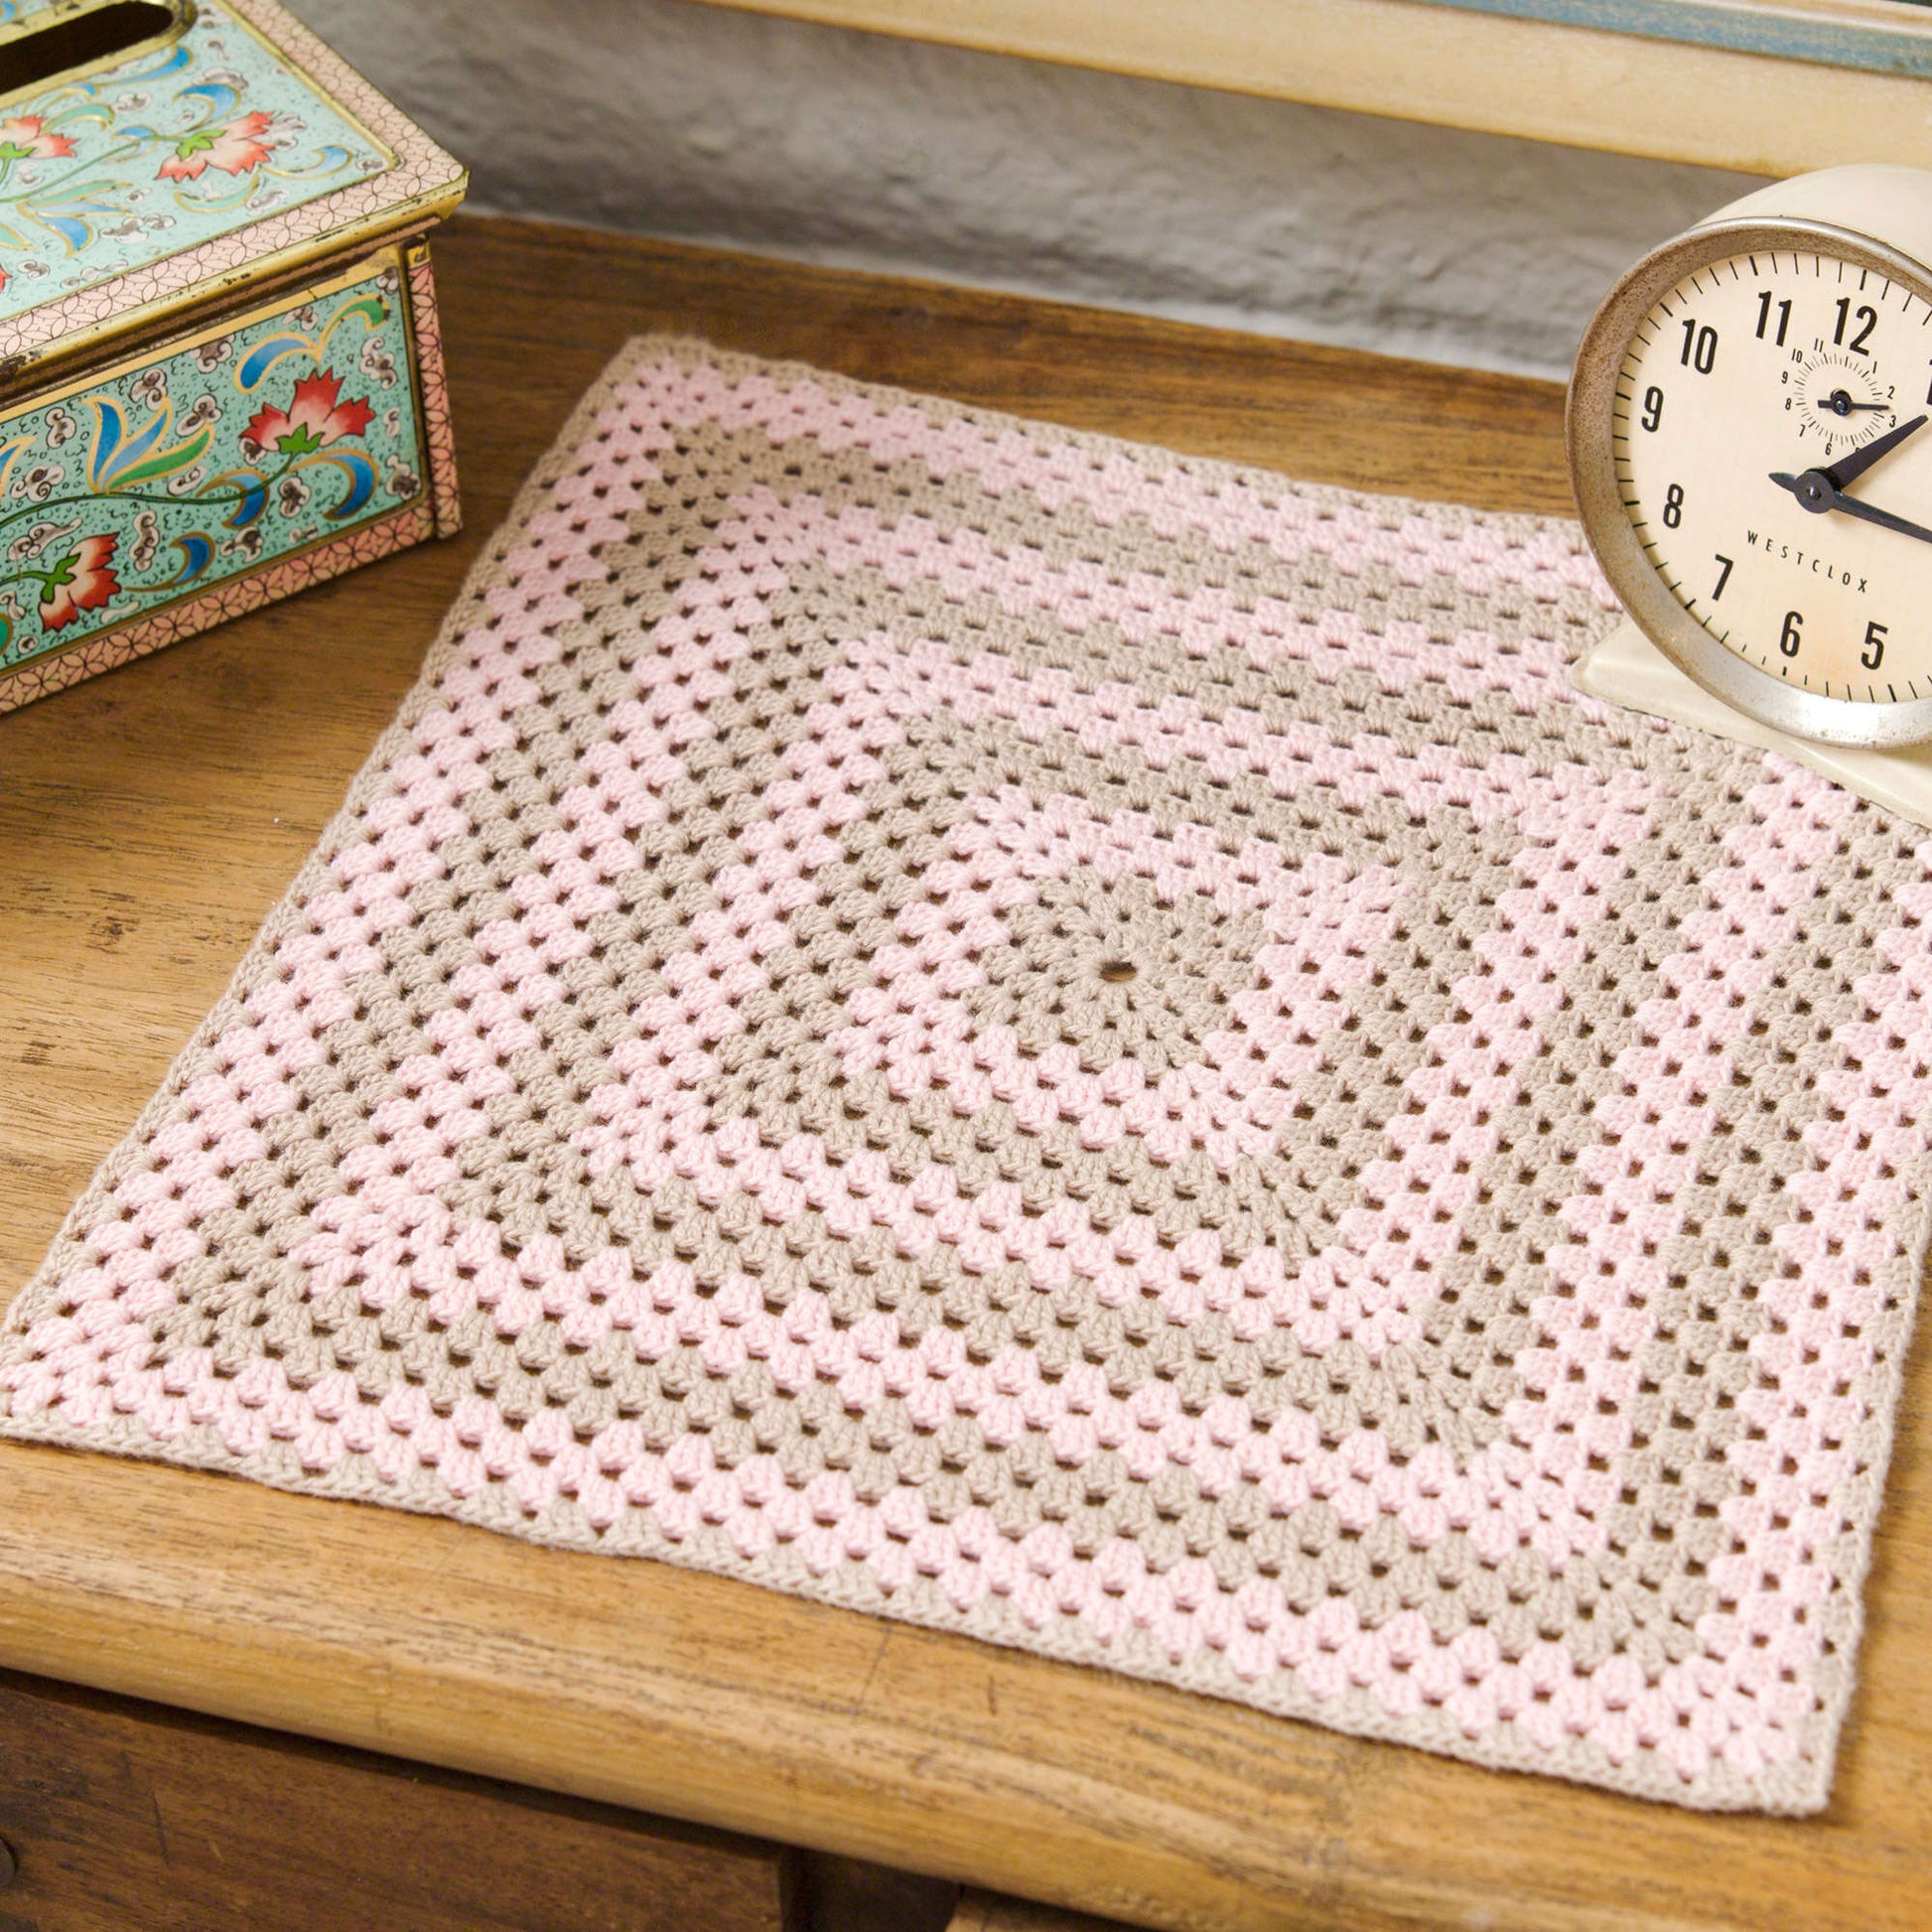 Free Aunt Lydia's Sophisticated Square Doily Crochet Pattern